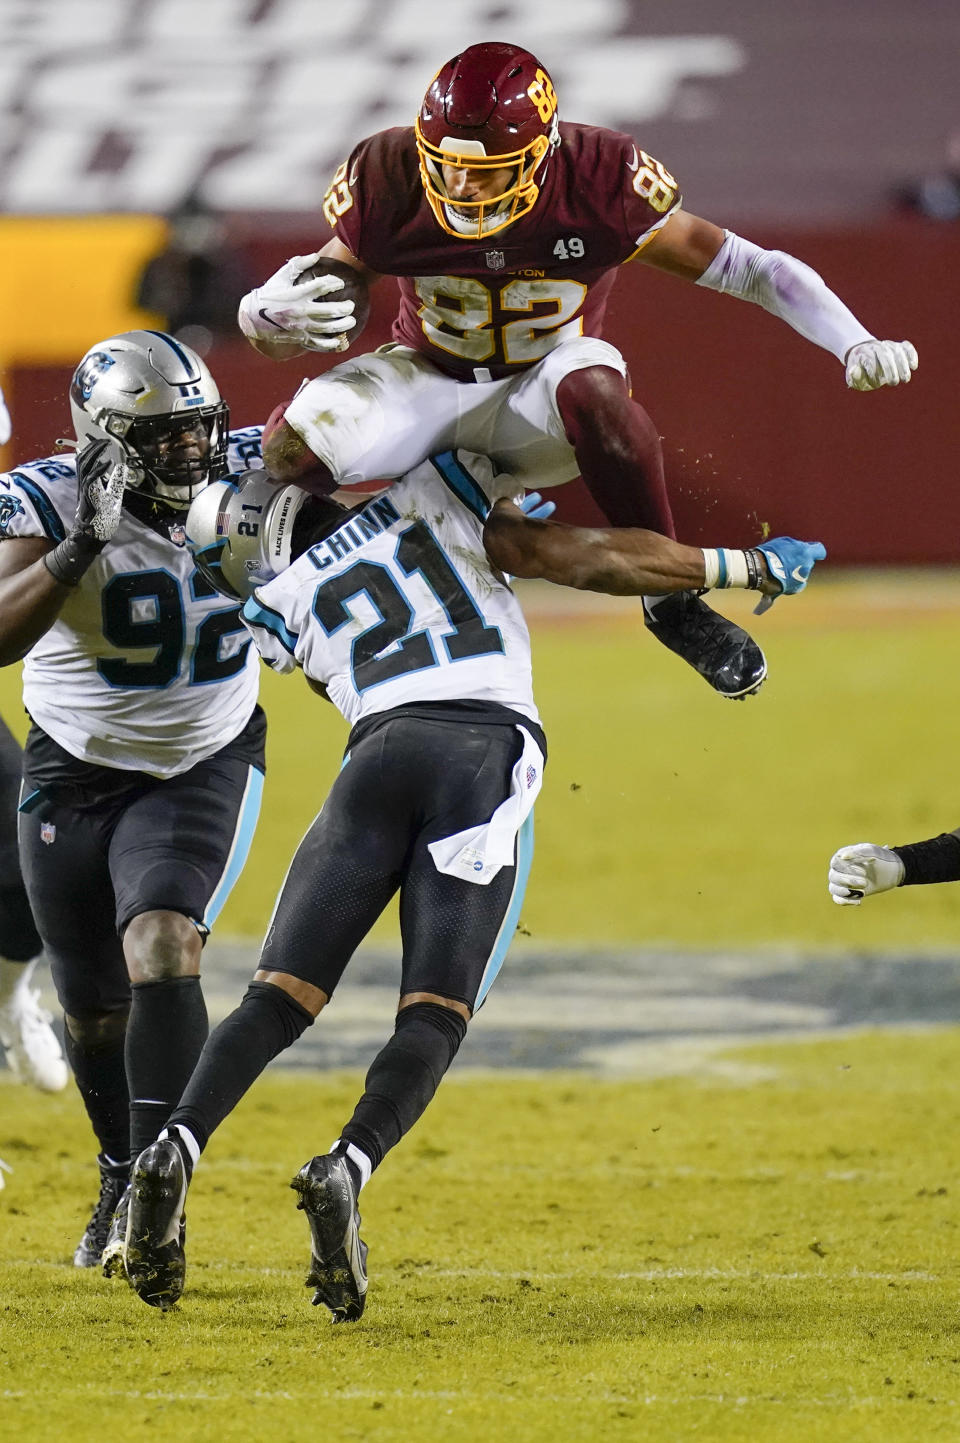 Washington Football Team tight end Logan Thomas (82) leaps over Carolina Panthers outside linebacker Jeremy Chinn (21) for a first down during the second half of an NFL football game Sunday, Dec. 27, 2020, in Landover, Md. Carolina won 20-13. (AP Photo/Carolyn Kaster)